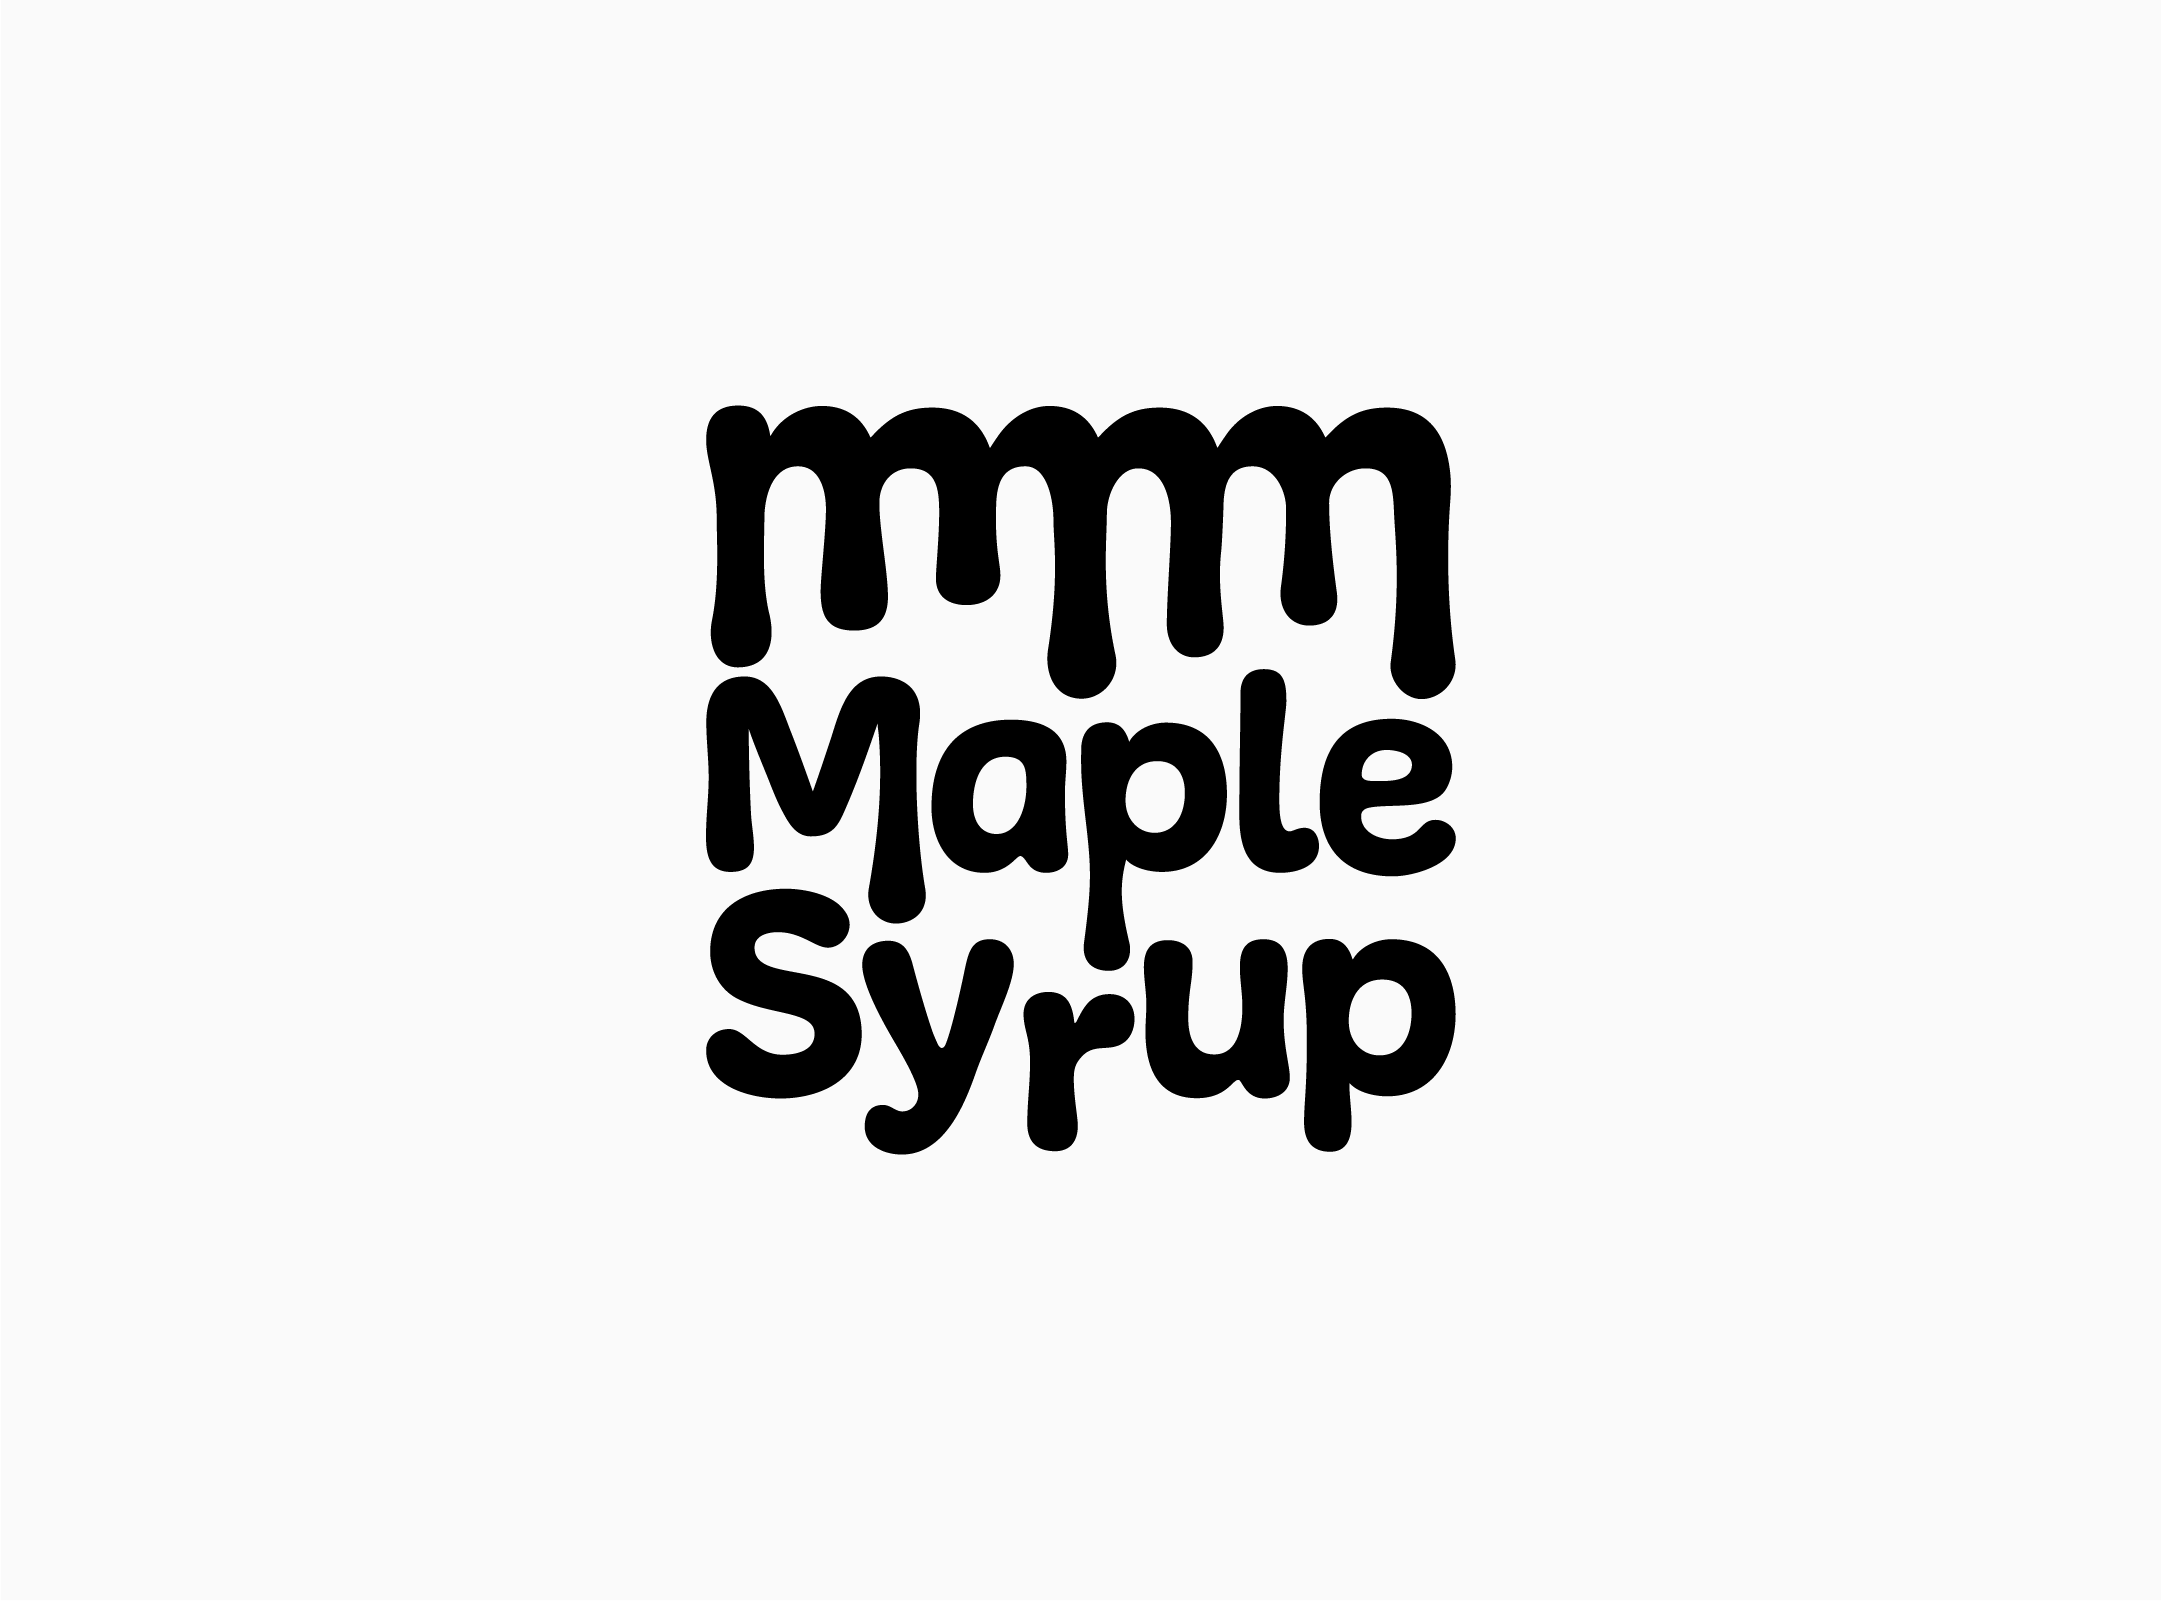 15 mmmMaple Syrup.png